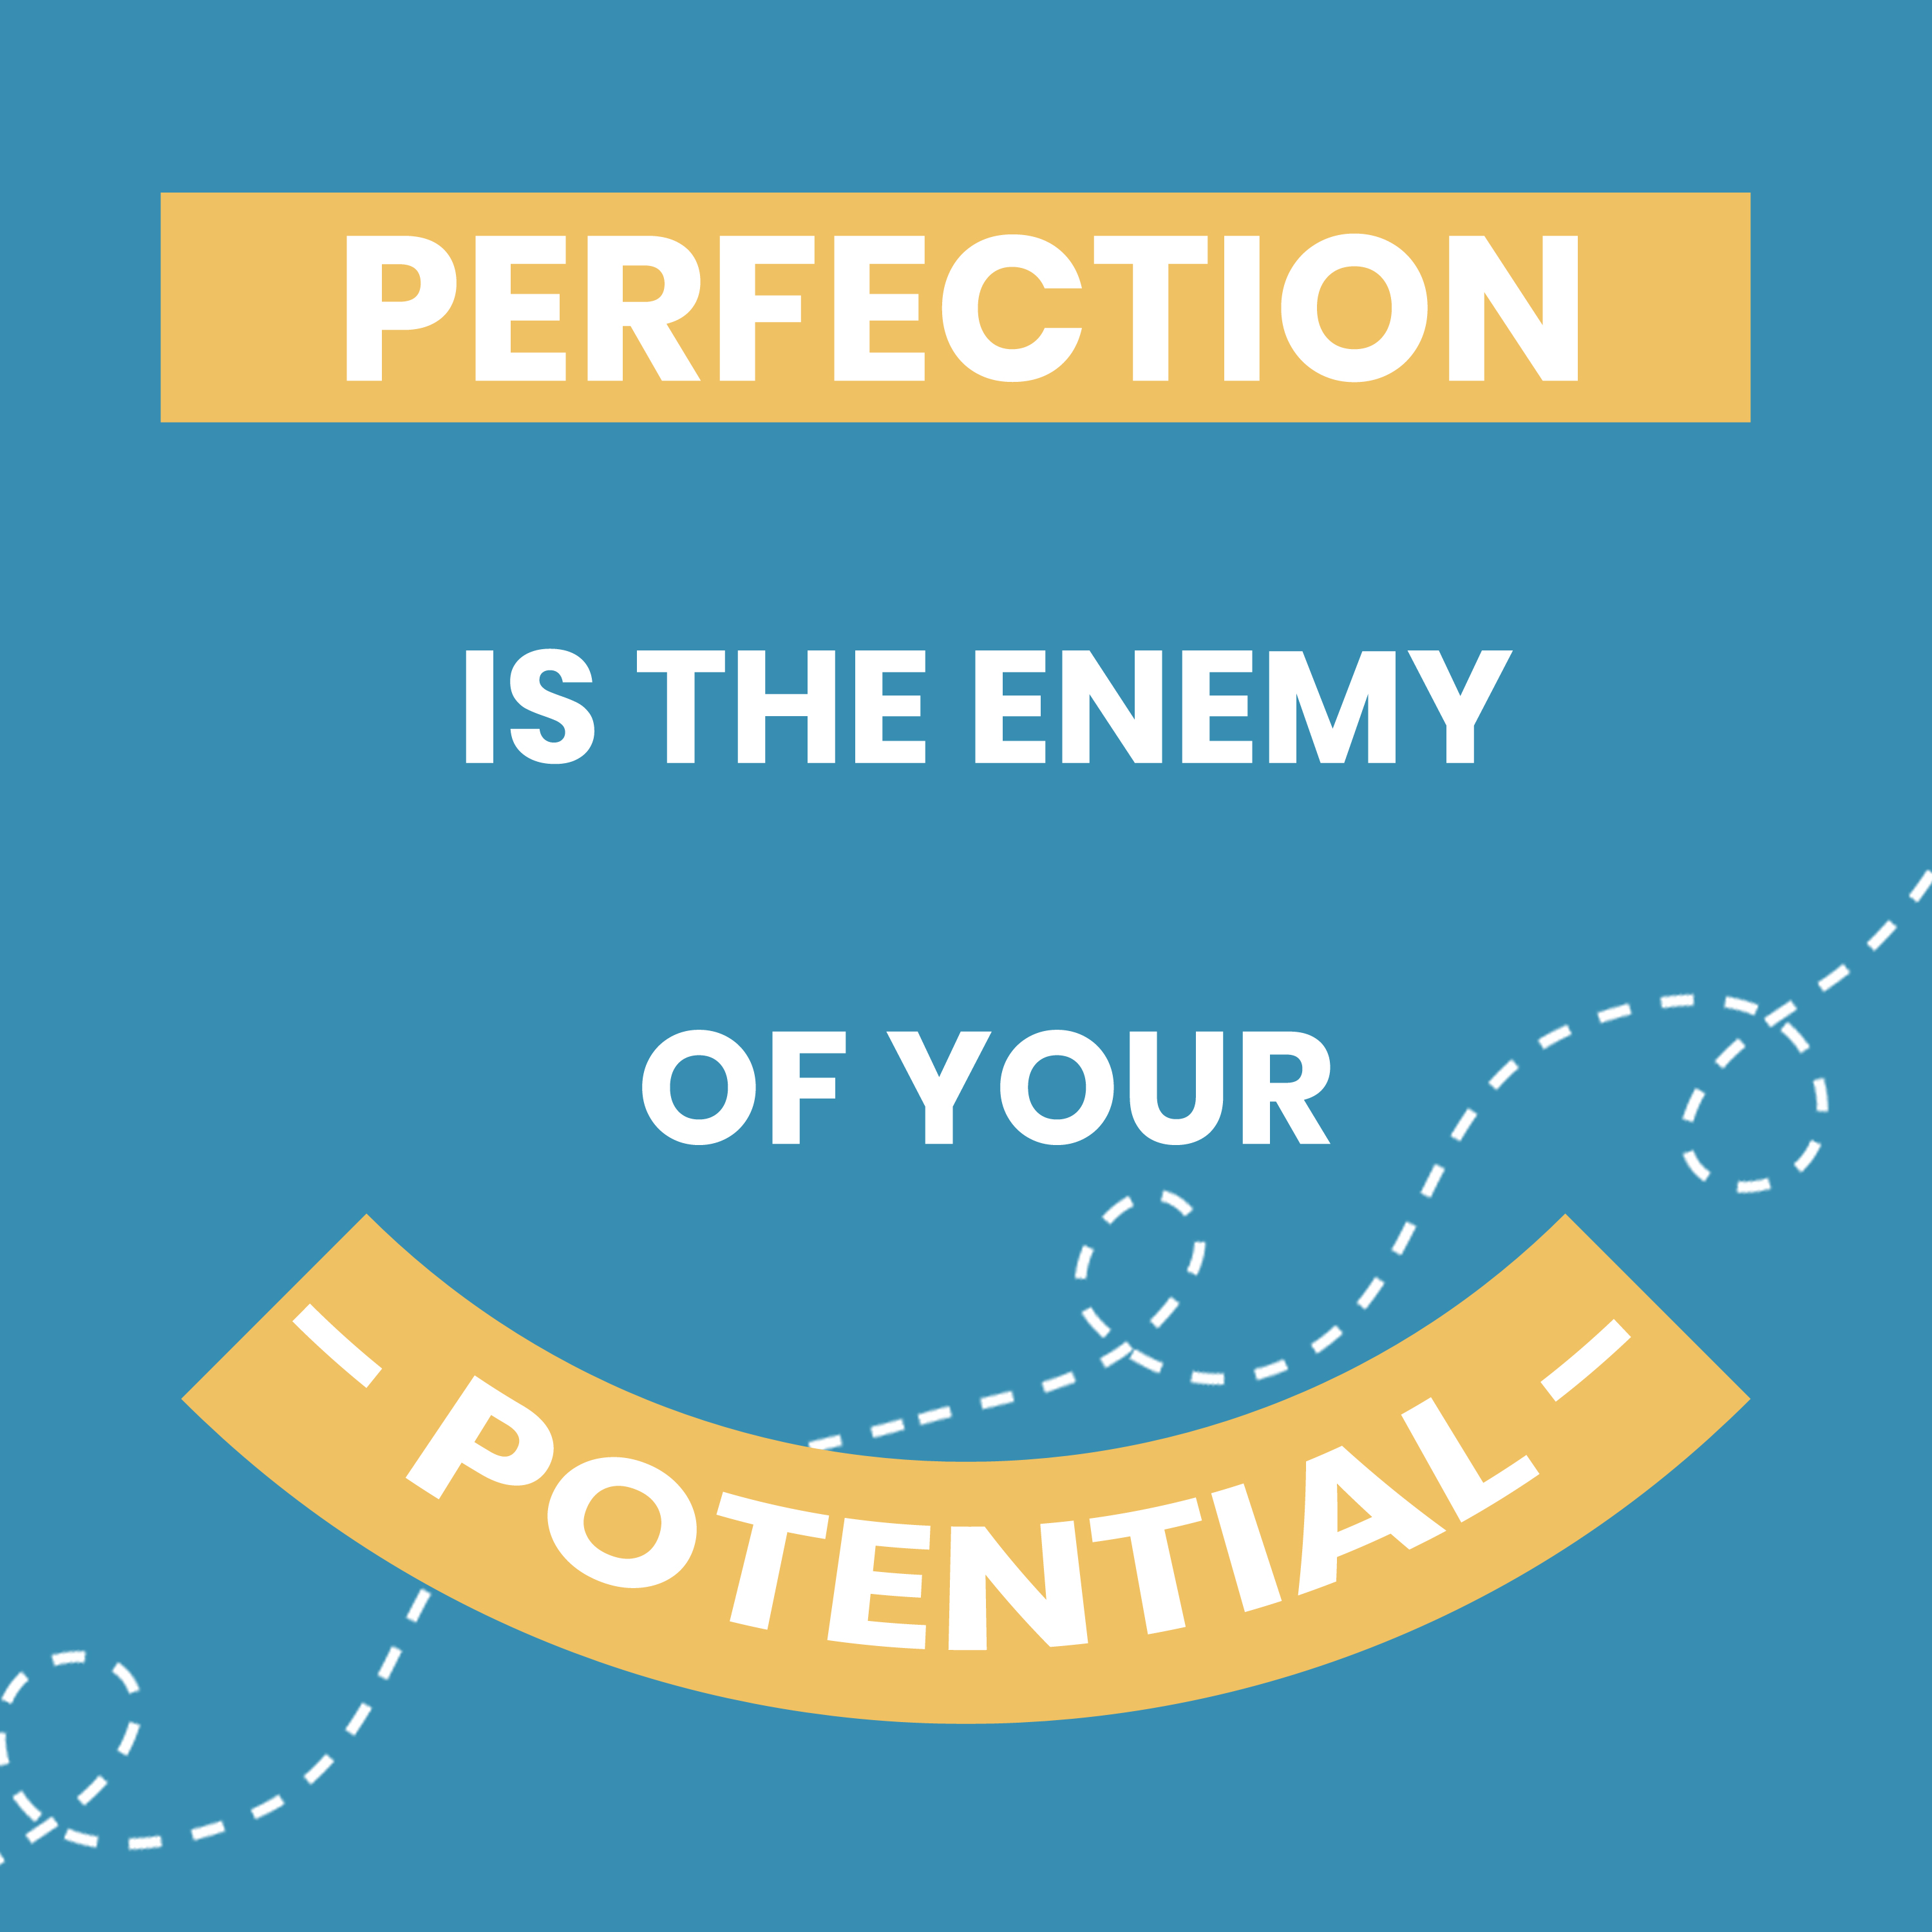 "Perfection Is The Enemy of Your Potential"